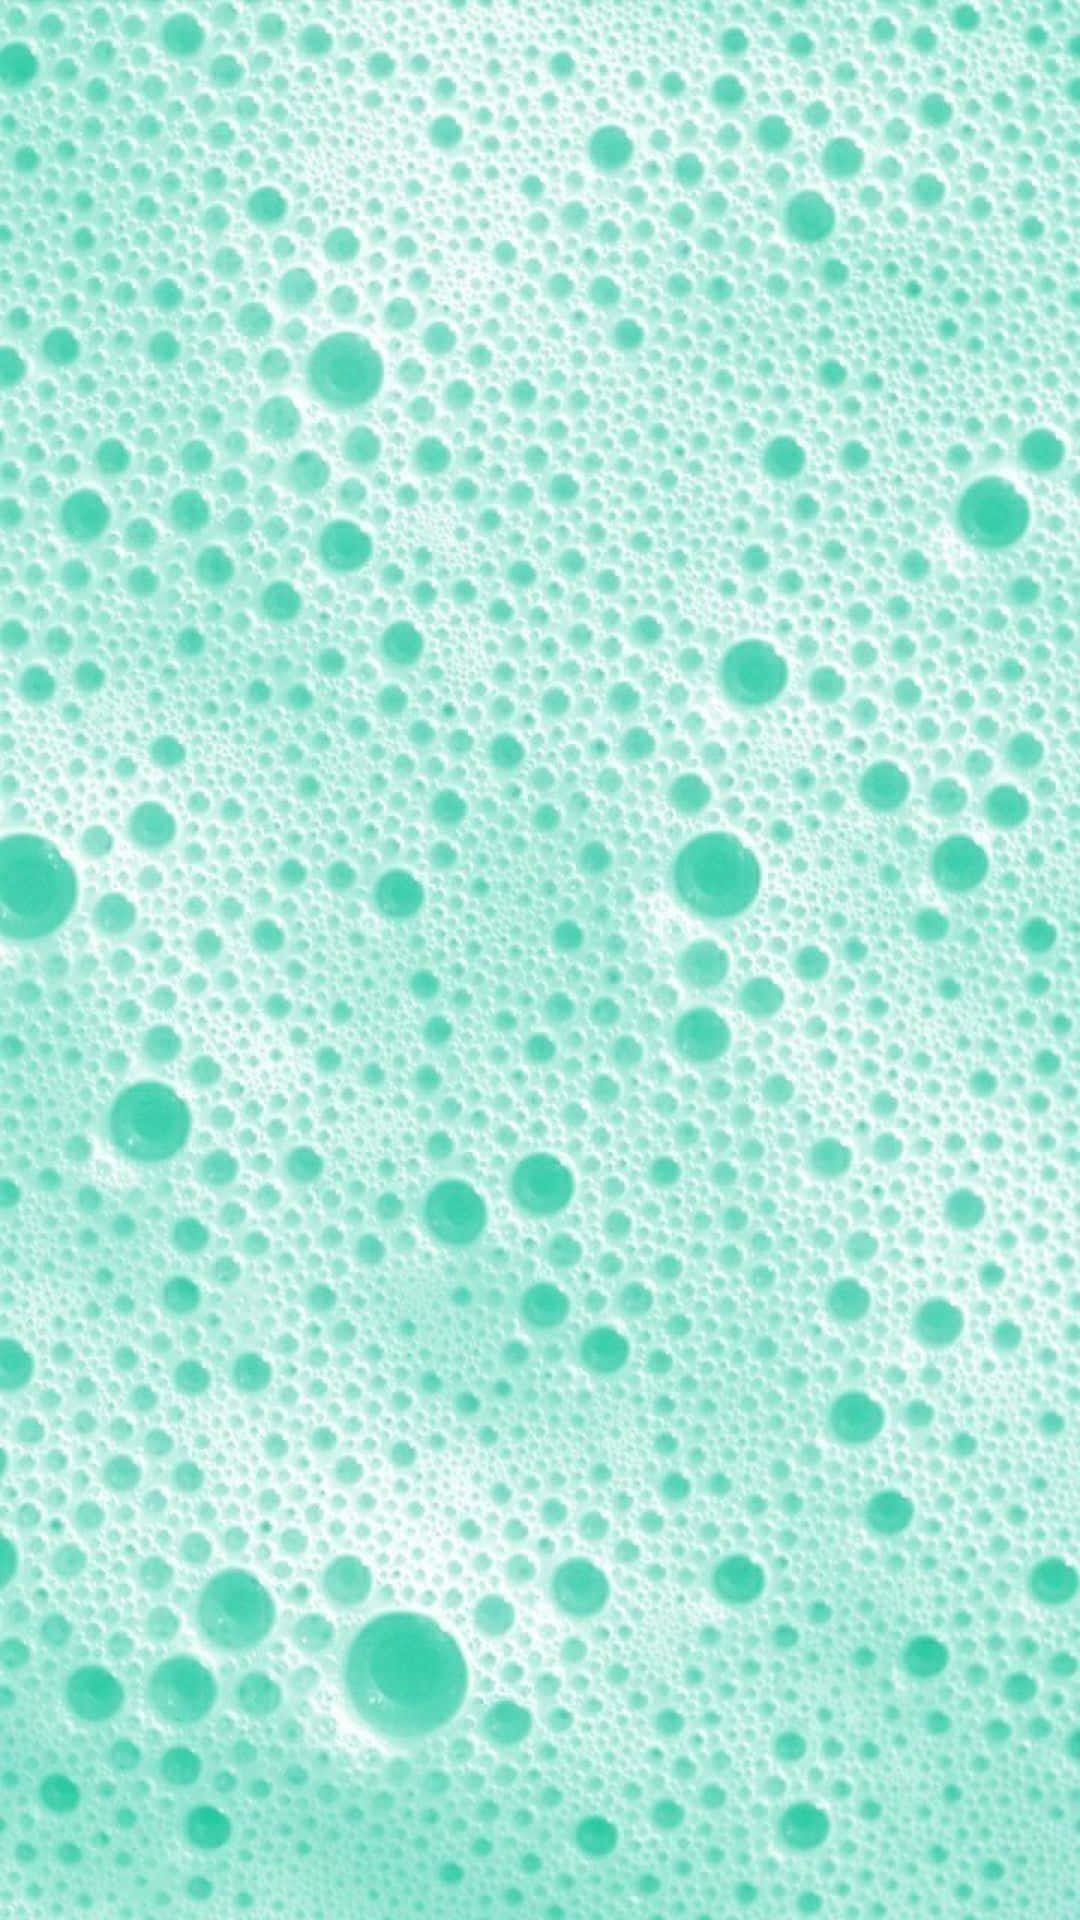 Bubbly Cute Green Aesthetic Background